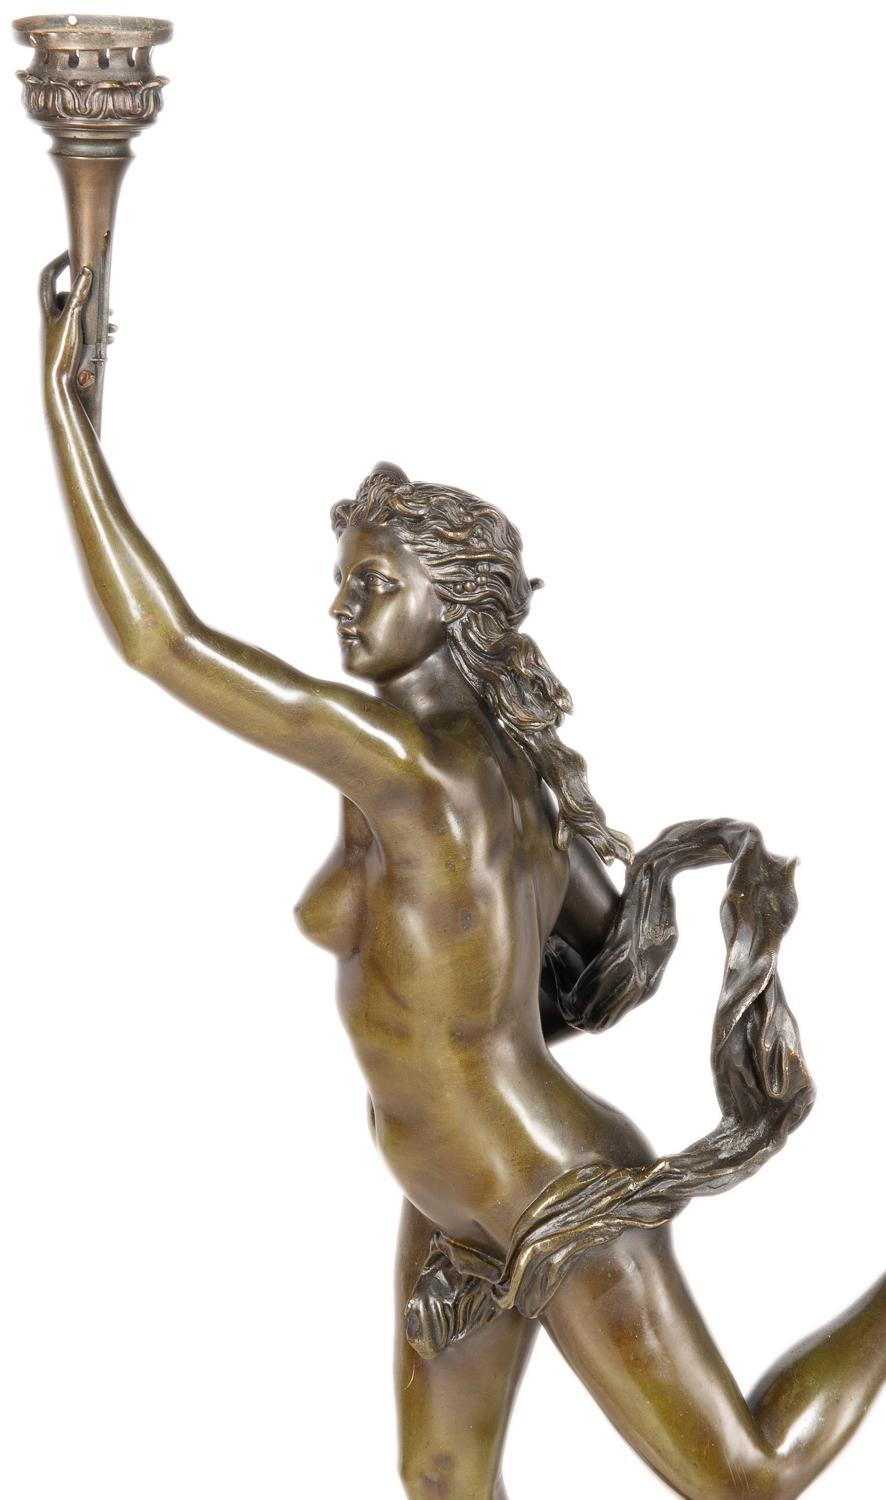 This bronze sculpture of Fortuna, the Roman goddess of fortune and luck is from circa 1880, after the famous Renaissance statue in Florence, Italy. Measures: 117 cm (46”).